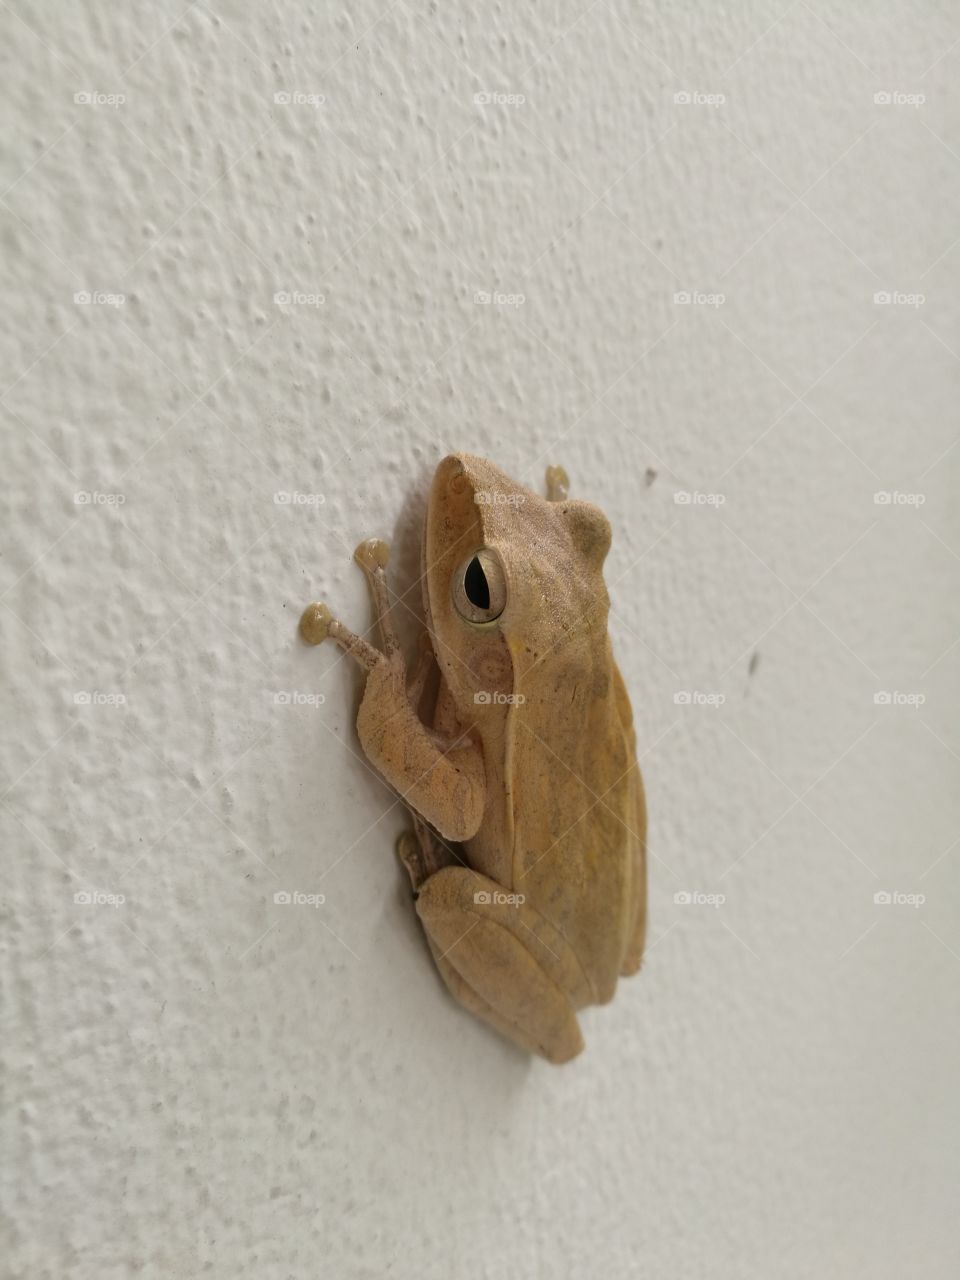 Green paddy frog climbing on the wall.